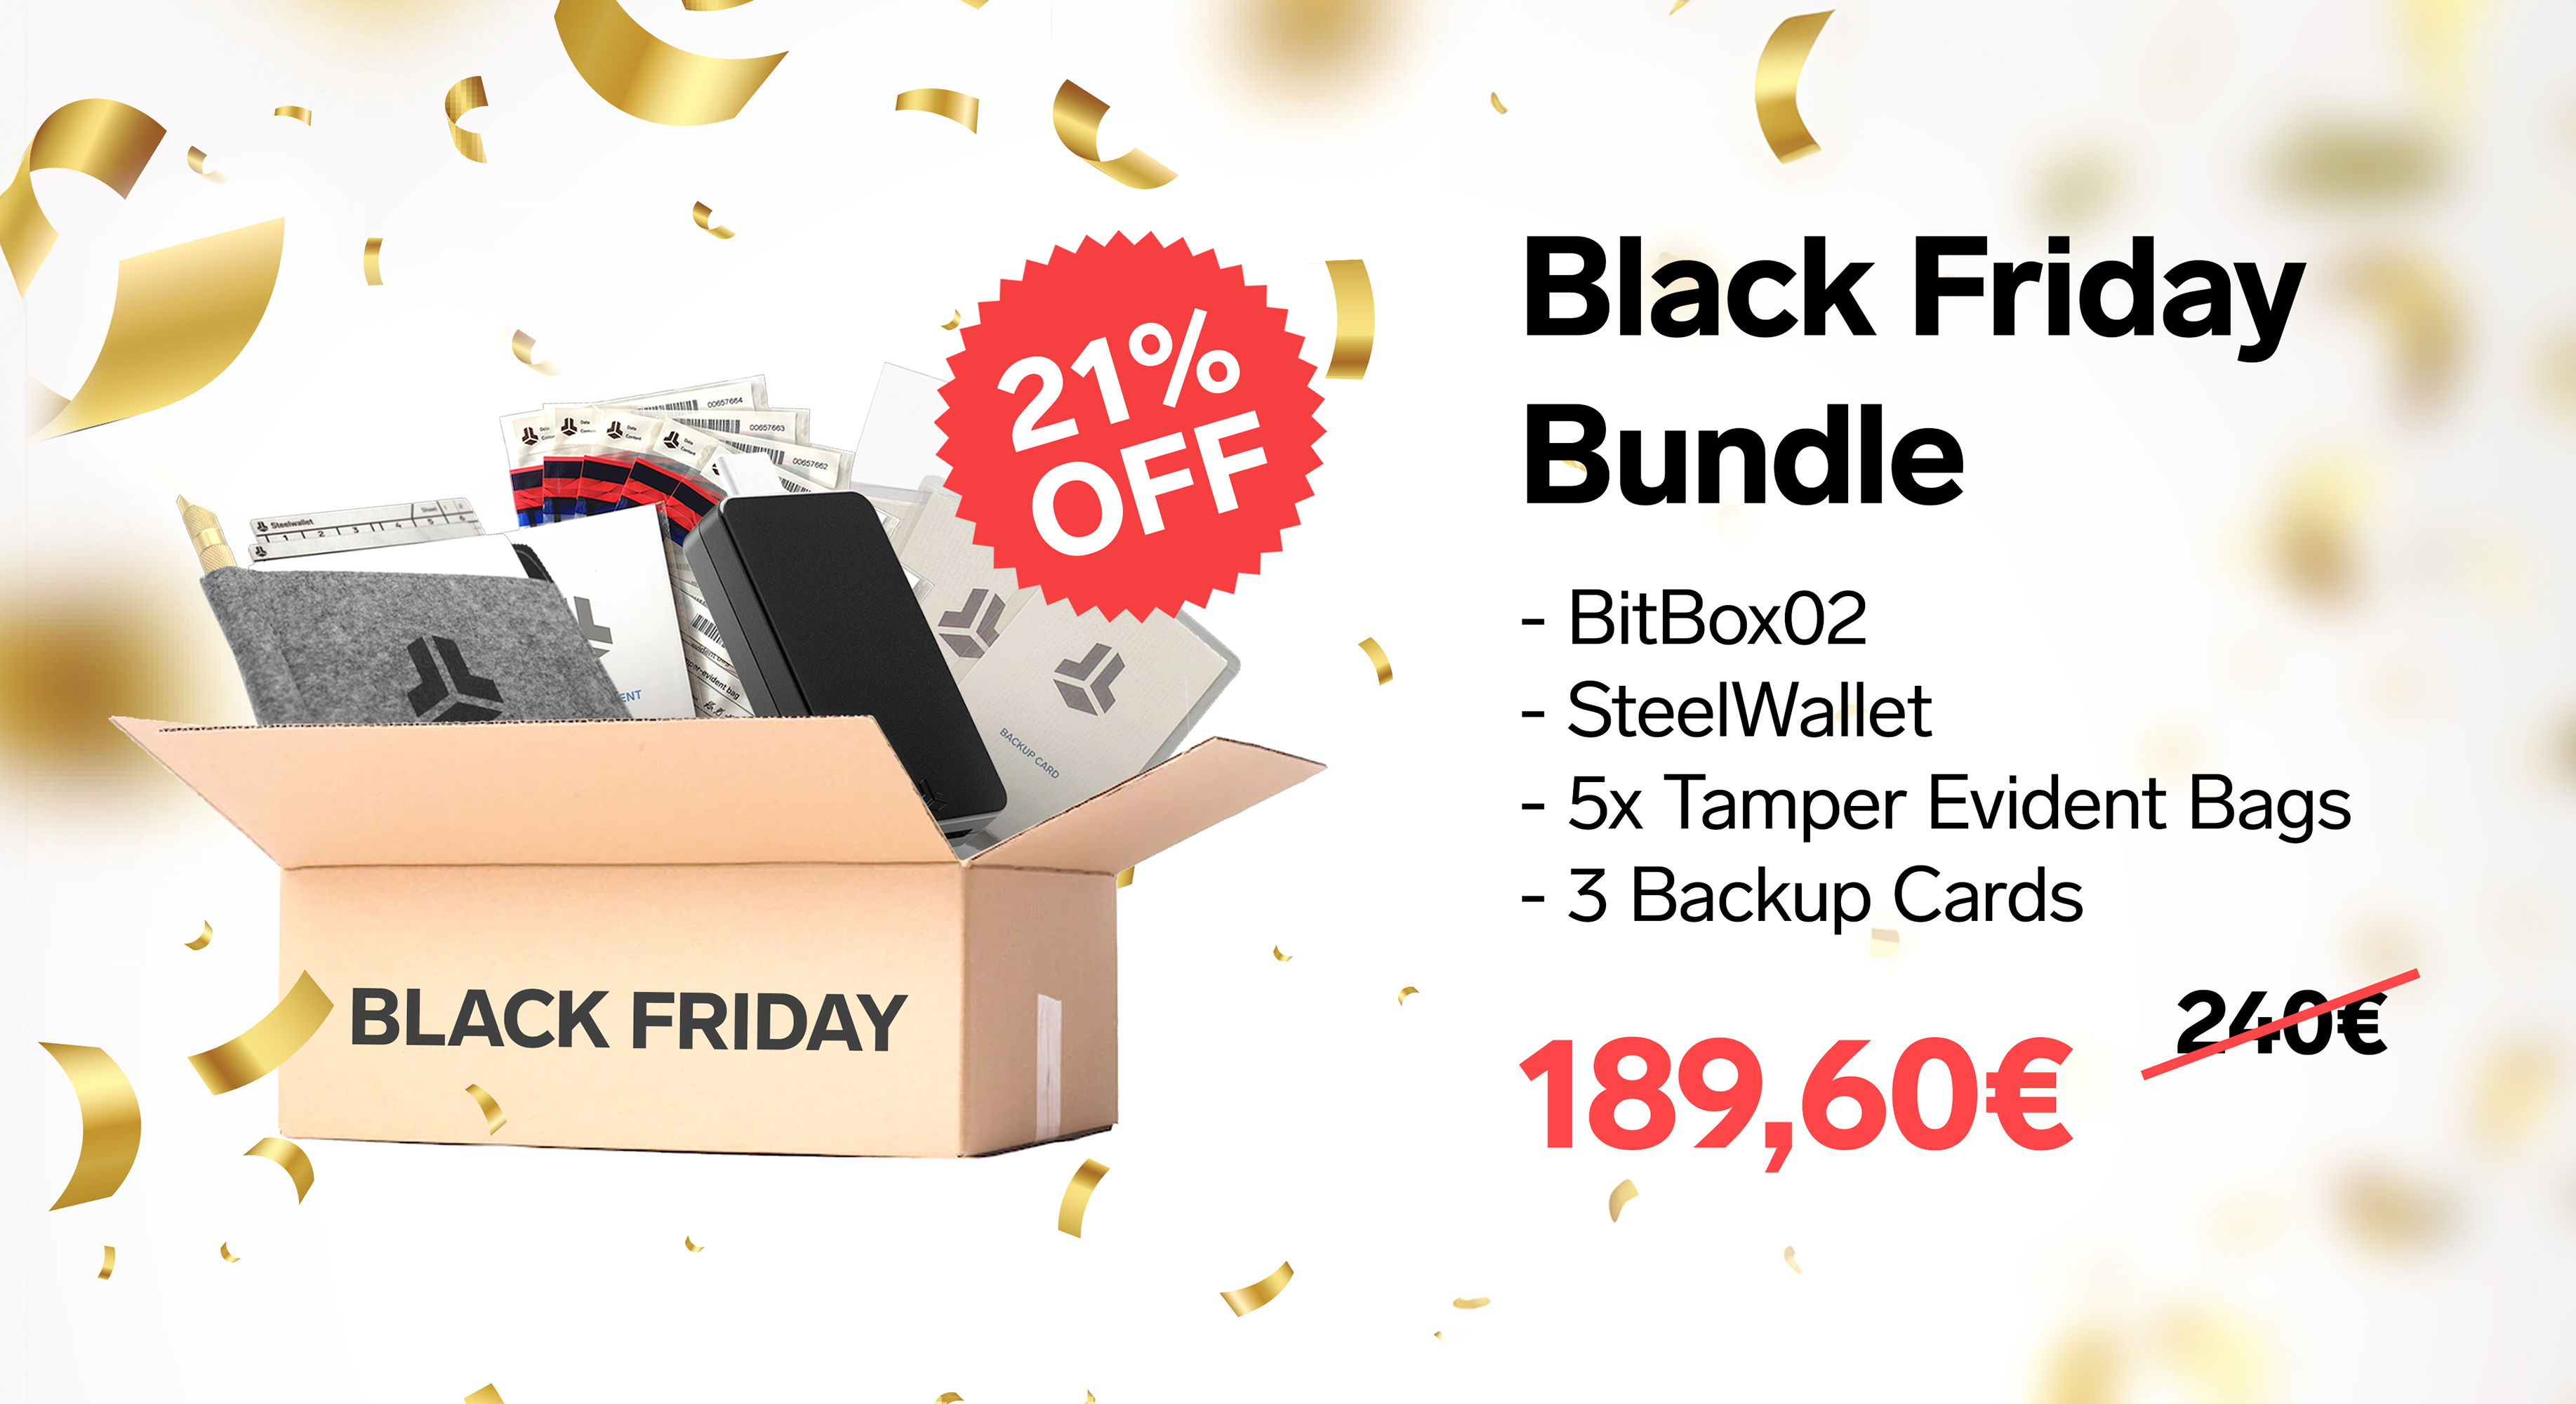 BitBox: This Black Friday enjoy 21% off on the items you need to securely store and manage your coins and wallet backups.